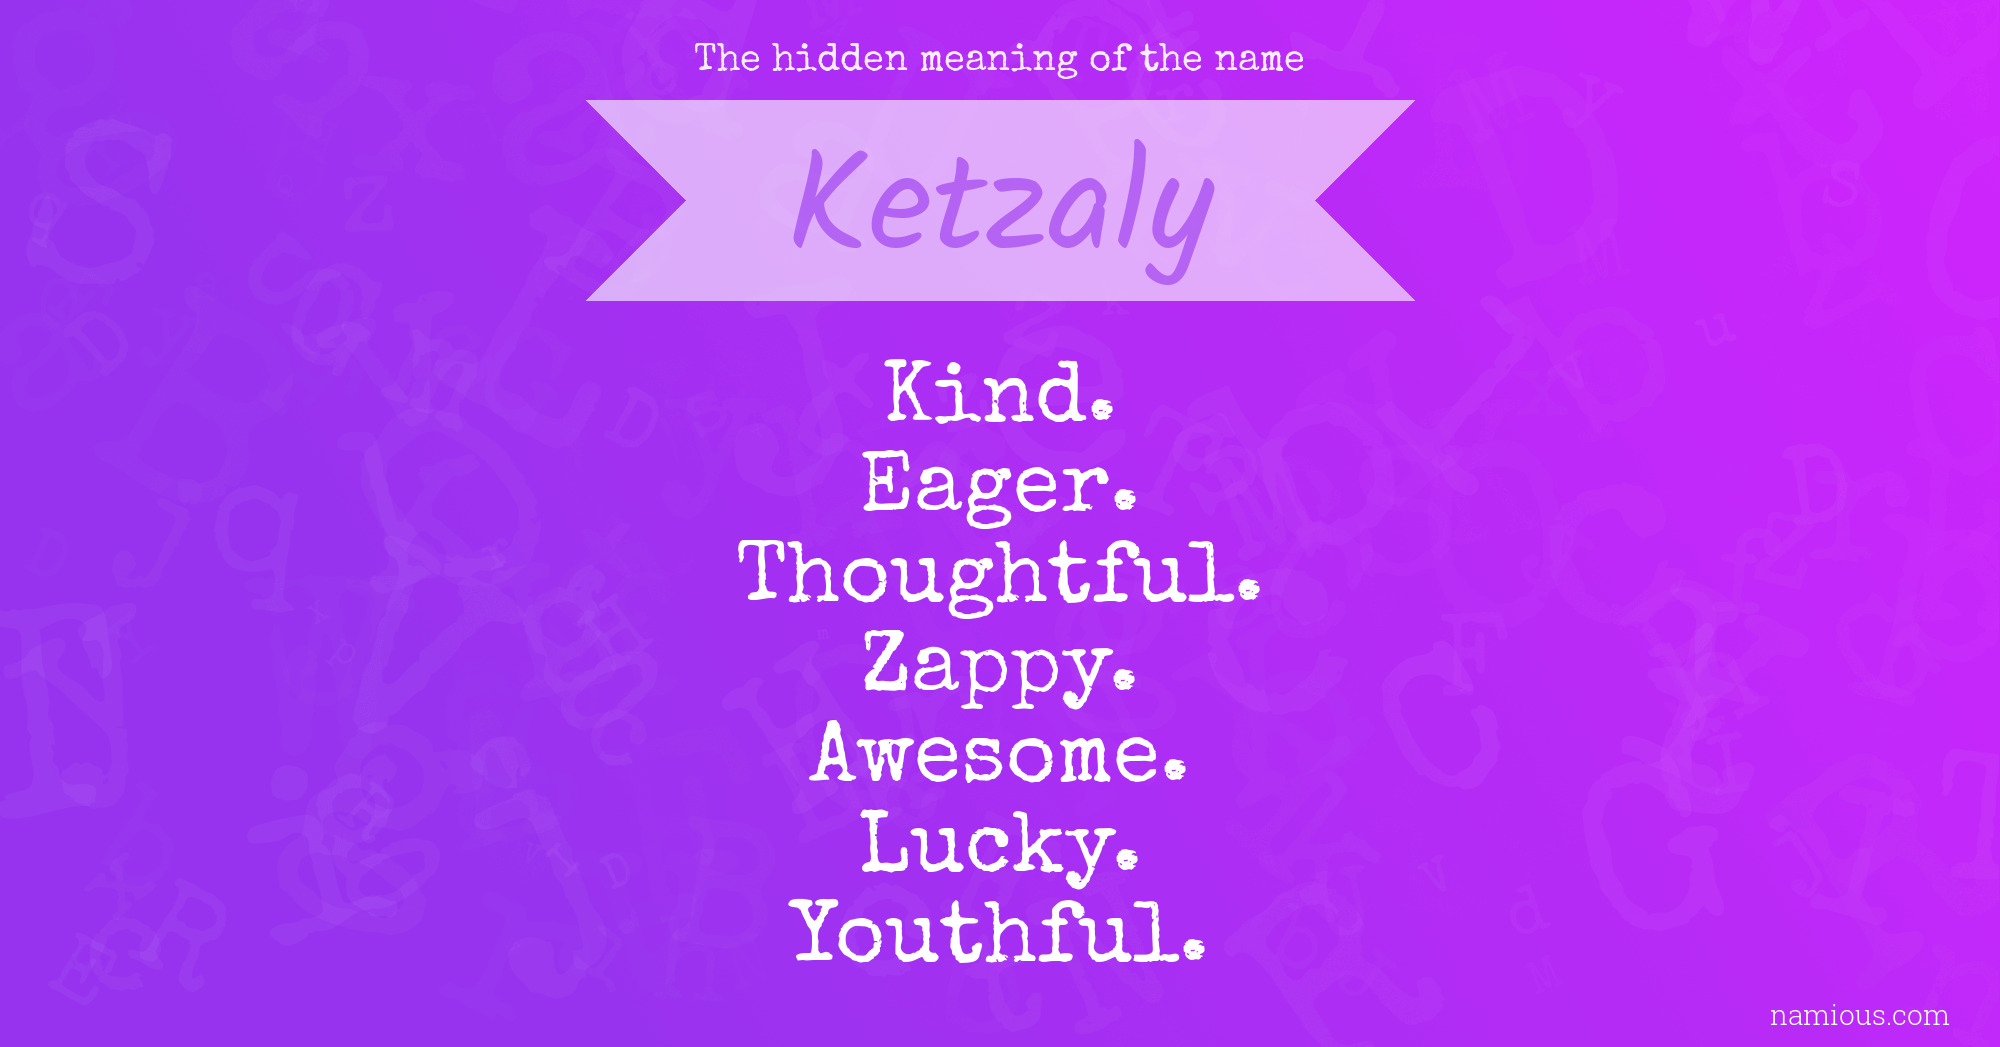 The hidden meaning of the name Ketzaly